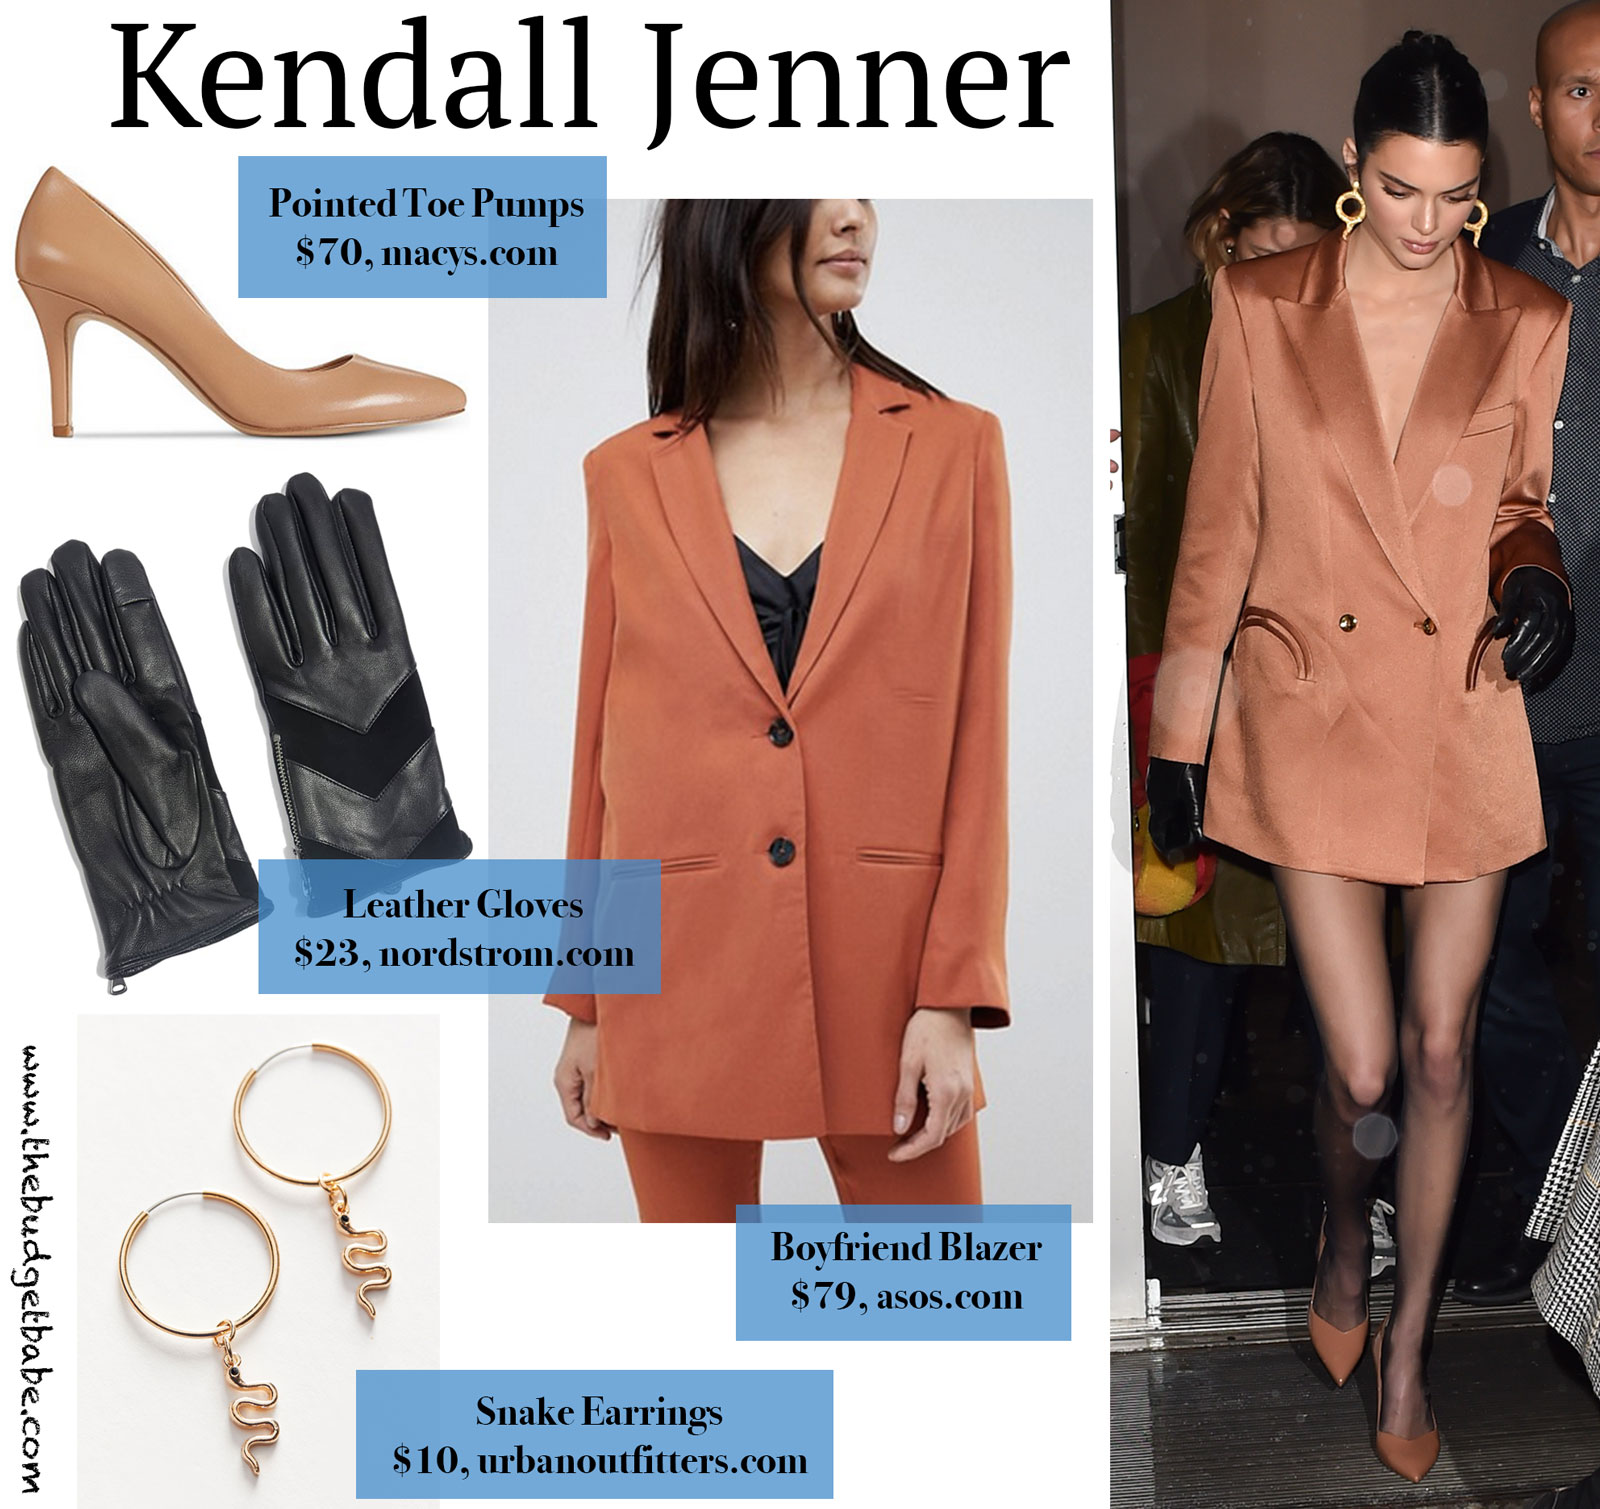 Kendall Jenner Blazer and Pumps Look for Less